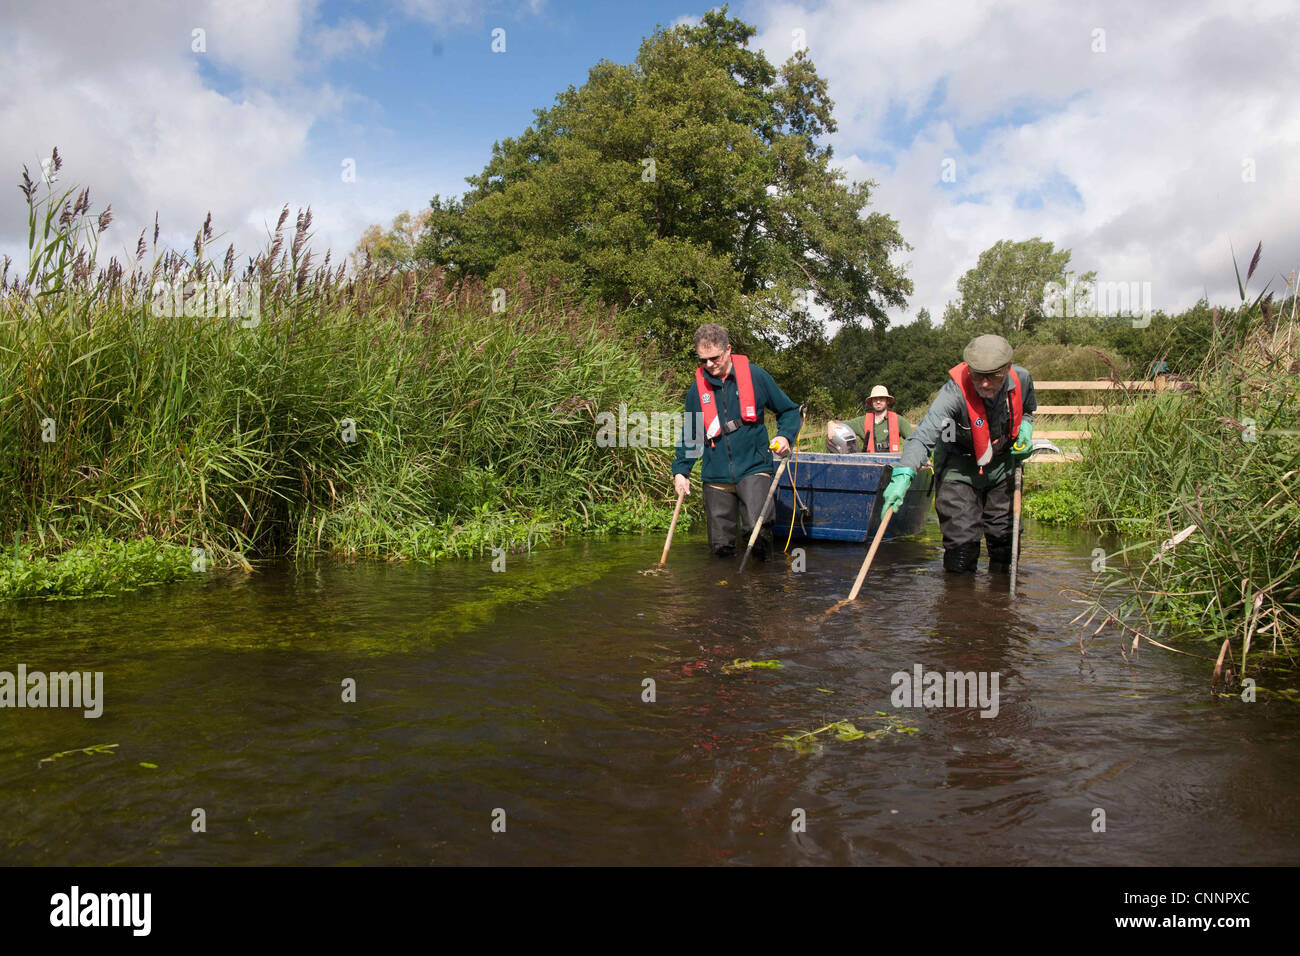 Conservation workers netting river during survey, River Wensum, Norfolk, England, september Stock Photo